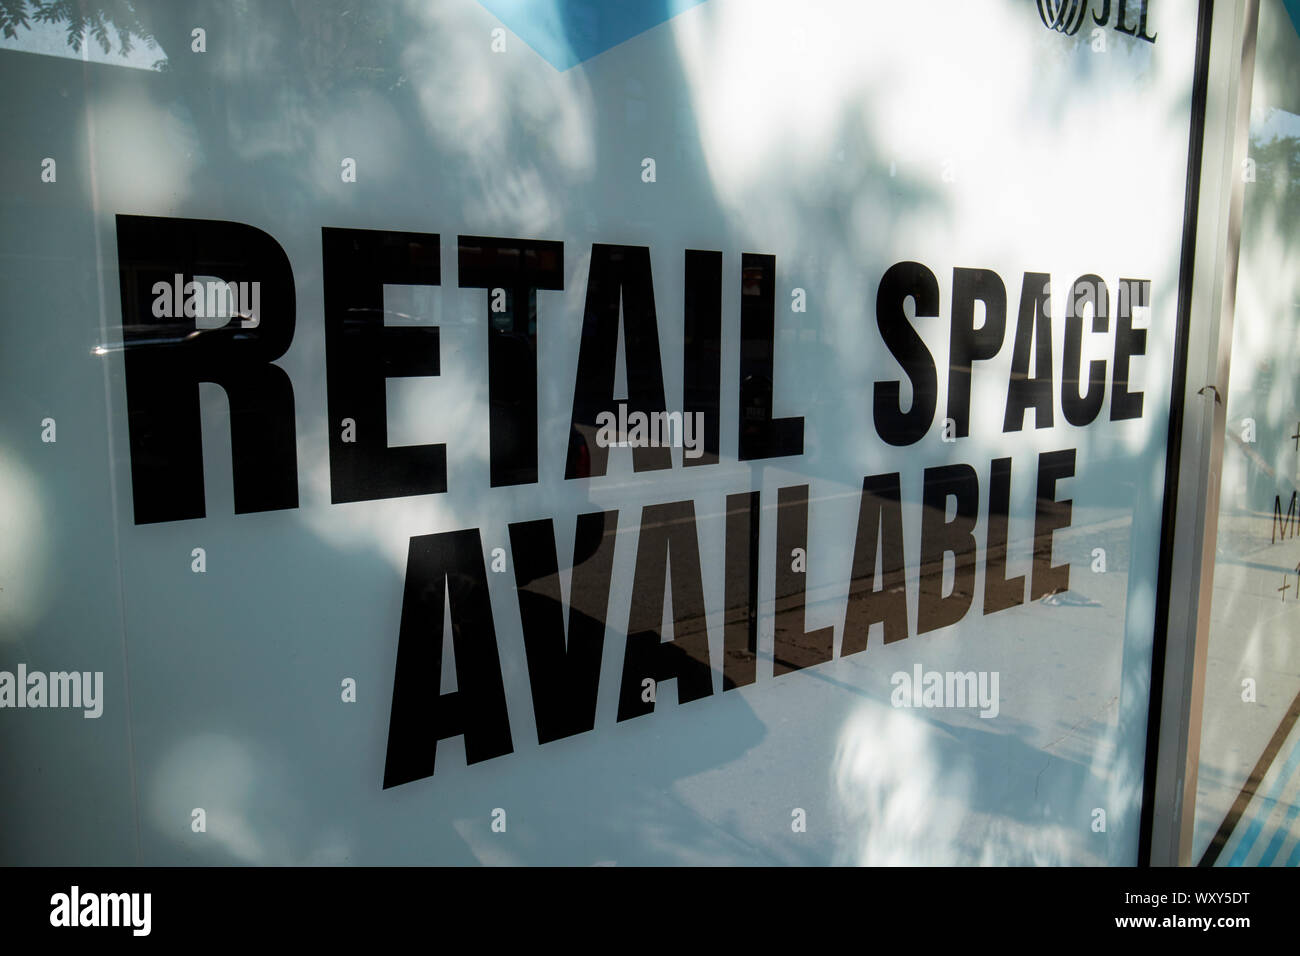 retail space available sign in the window of an empty store chicago illinois united states of america Stock Photo